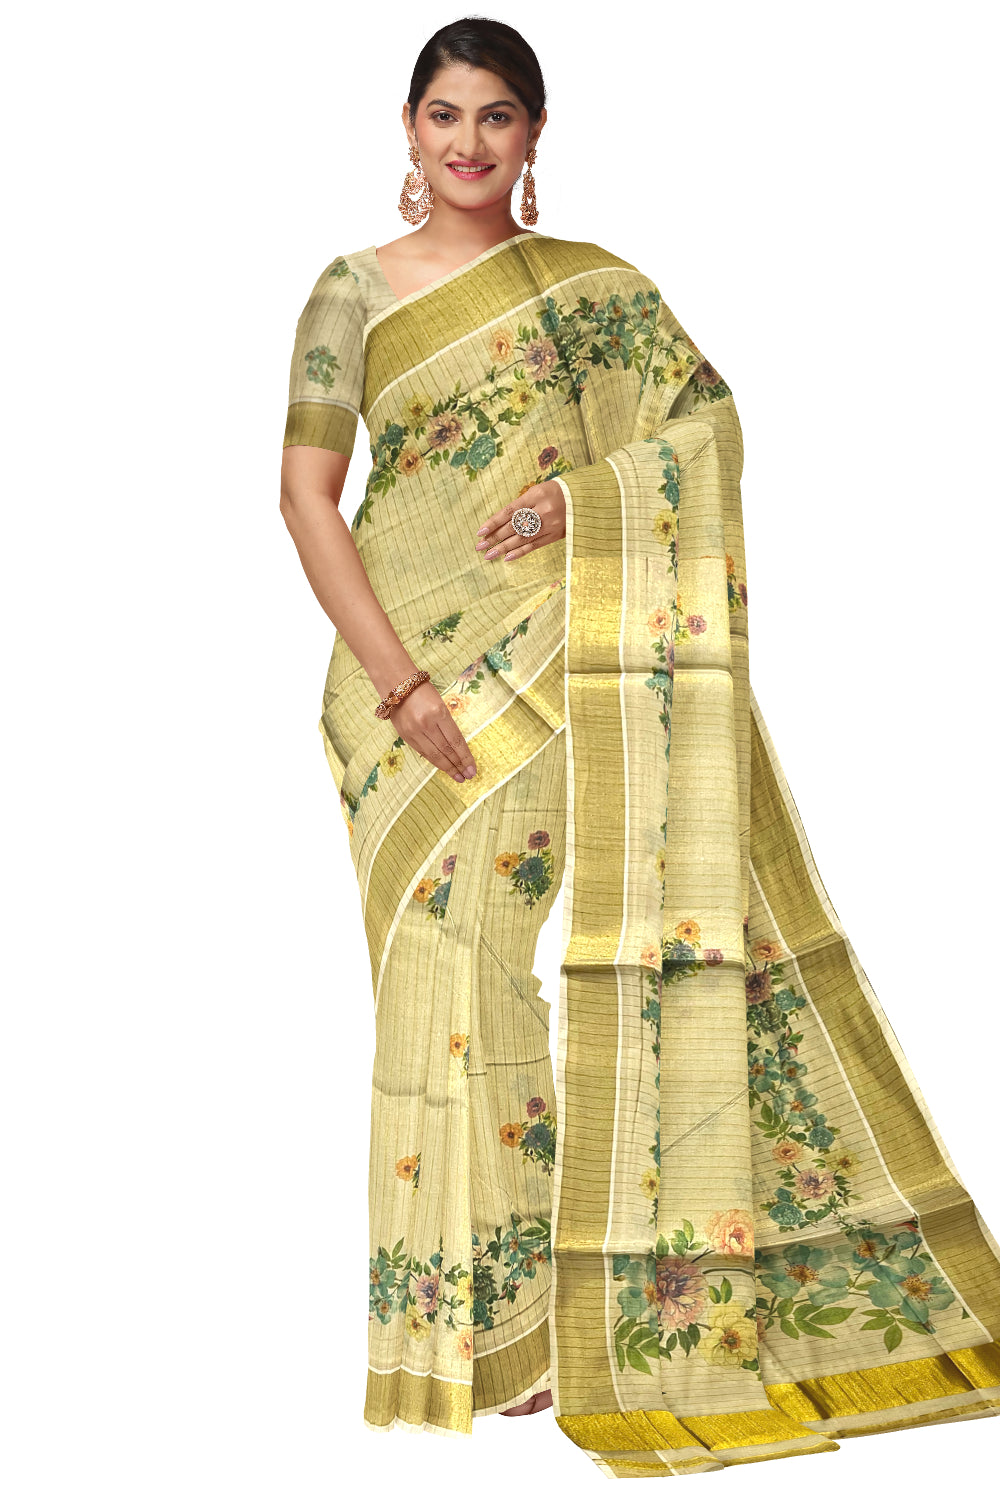 Kerala Tissue Kasavu Lines Design Saree with Floral Mural Prints on Body